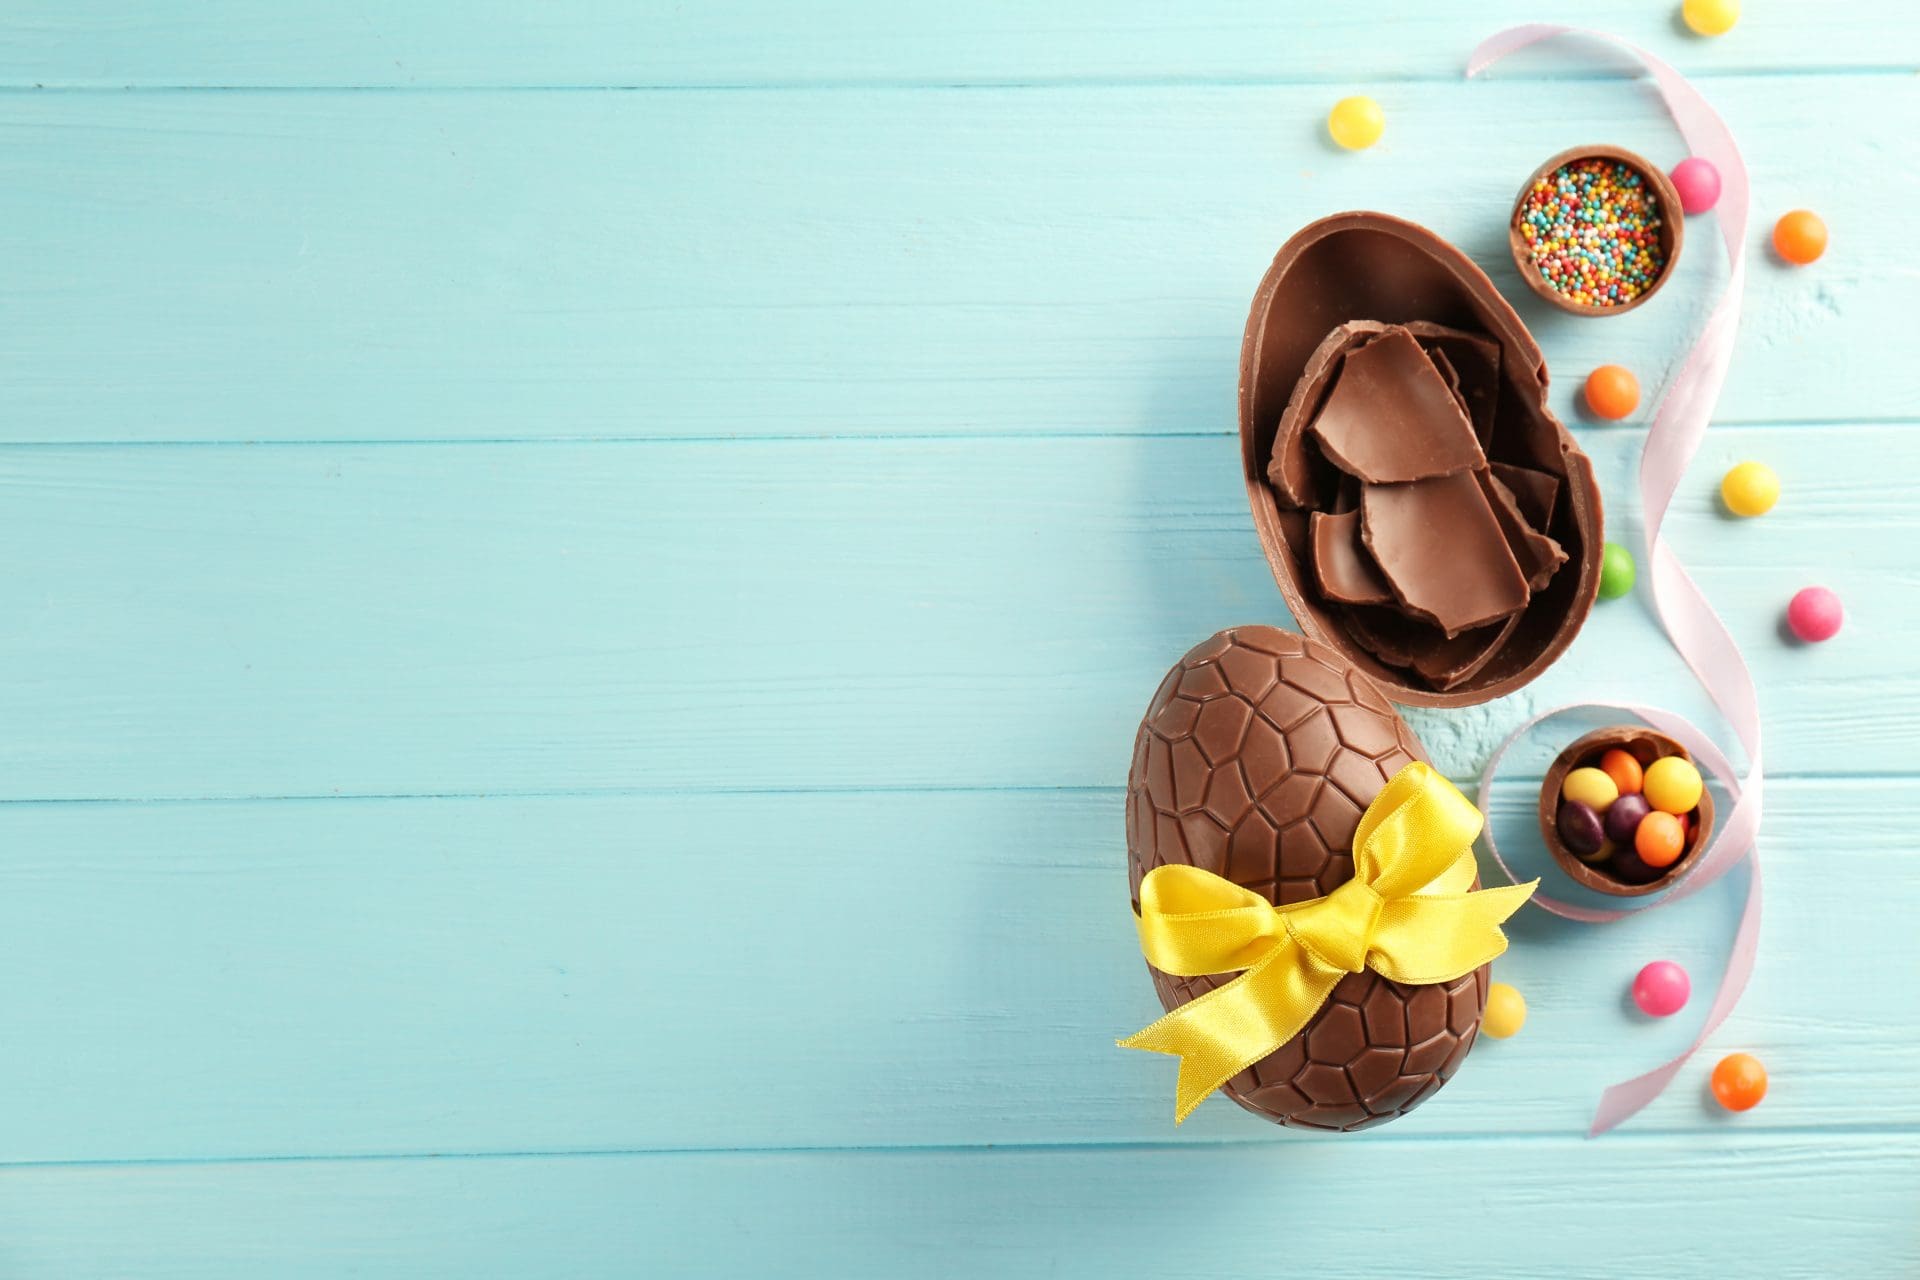 Photo of Chocolate Easter Eggs on turquoise blue background